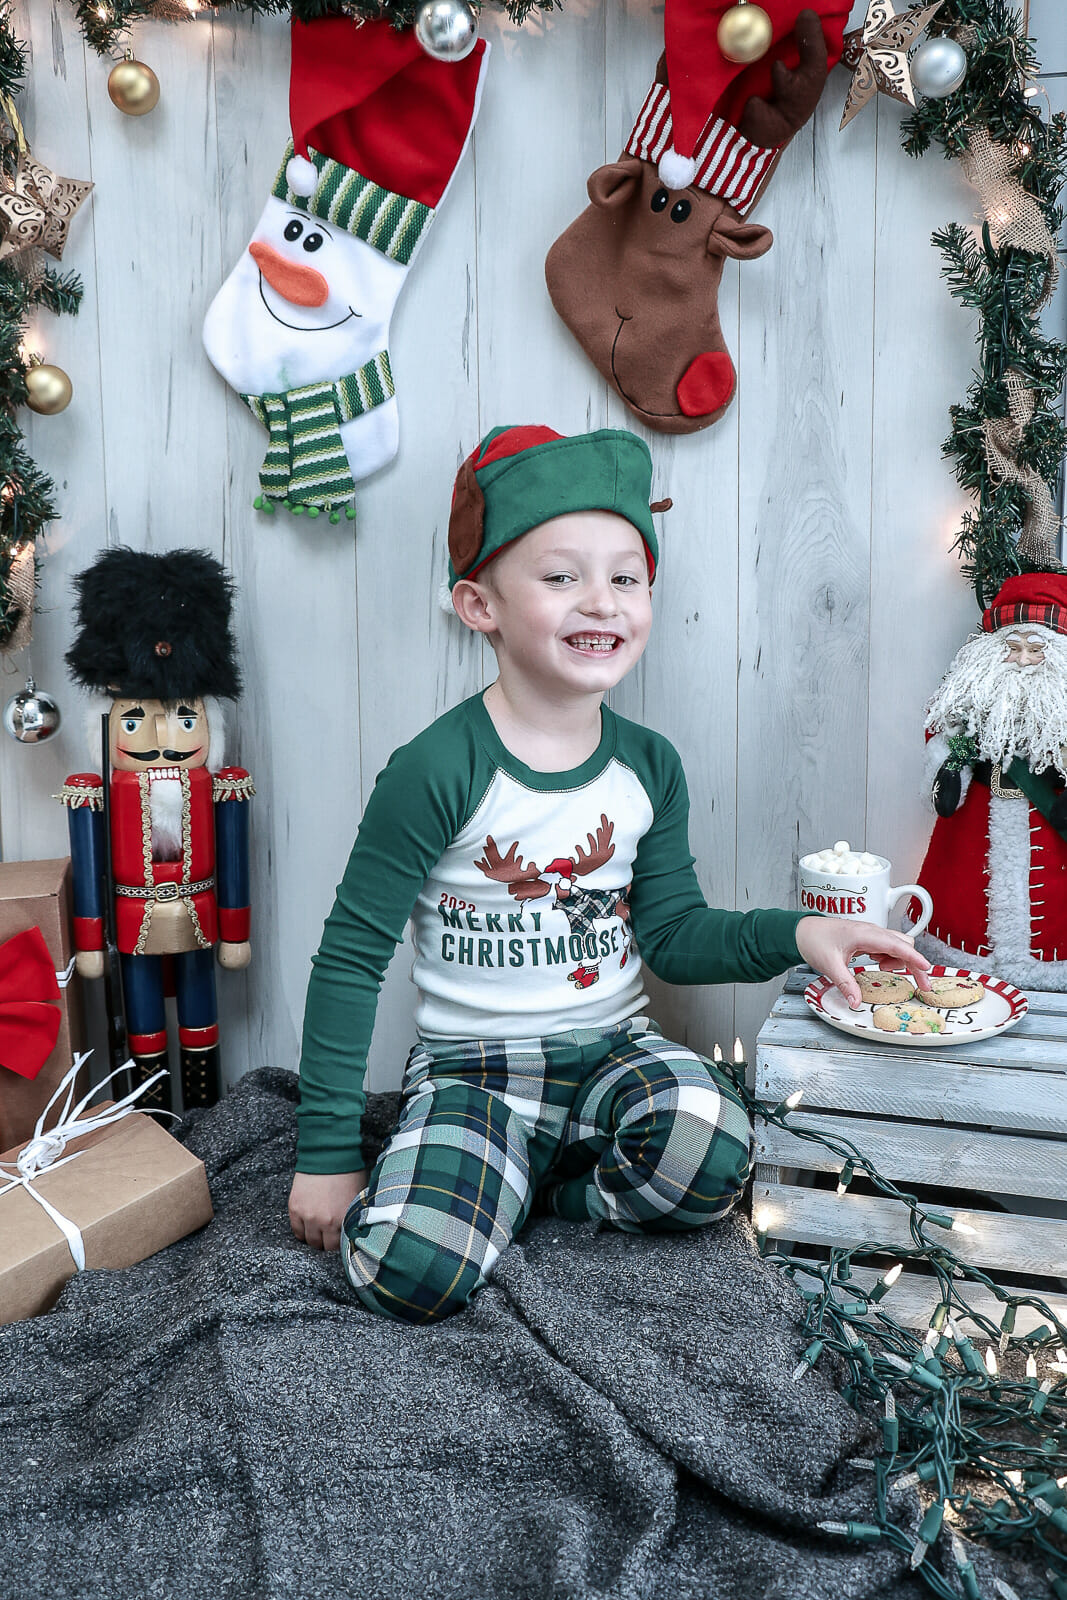 A photo from the Kay Christmas Mini Shoot, shot in Port Wade, Nova Scotia on wintery morning inside with Christmas tree, stockings and nutcrackers.